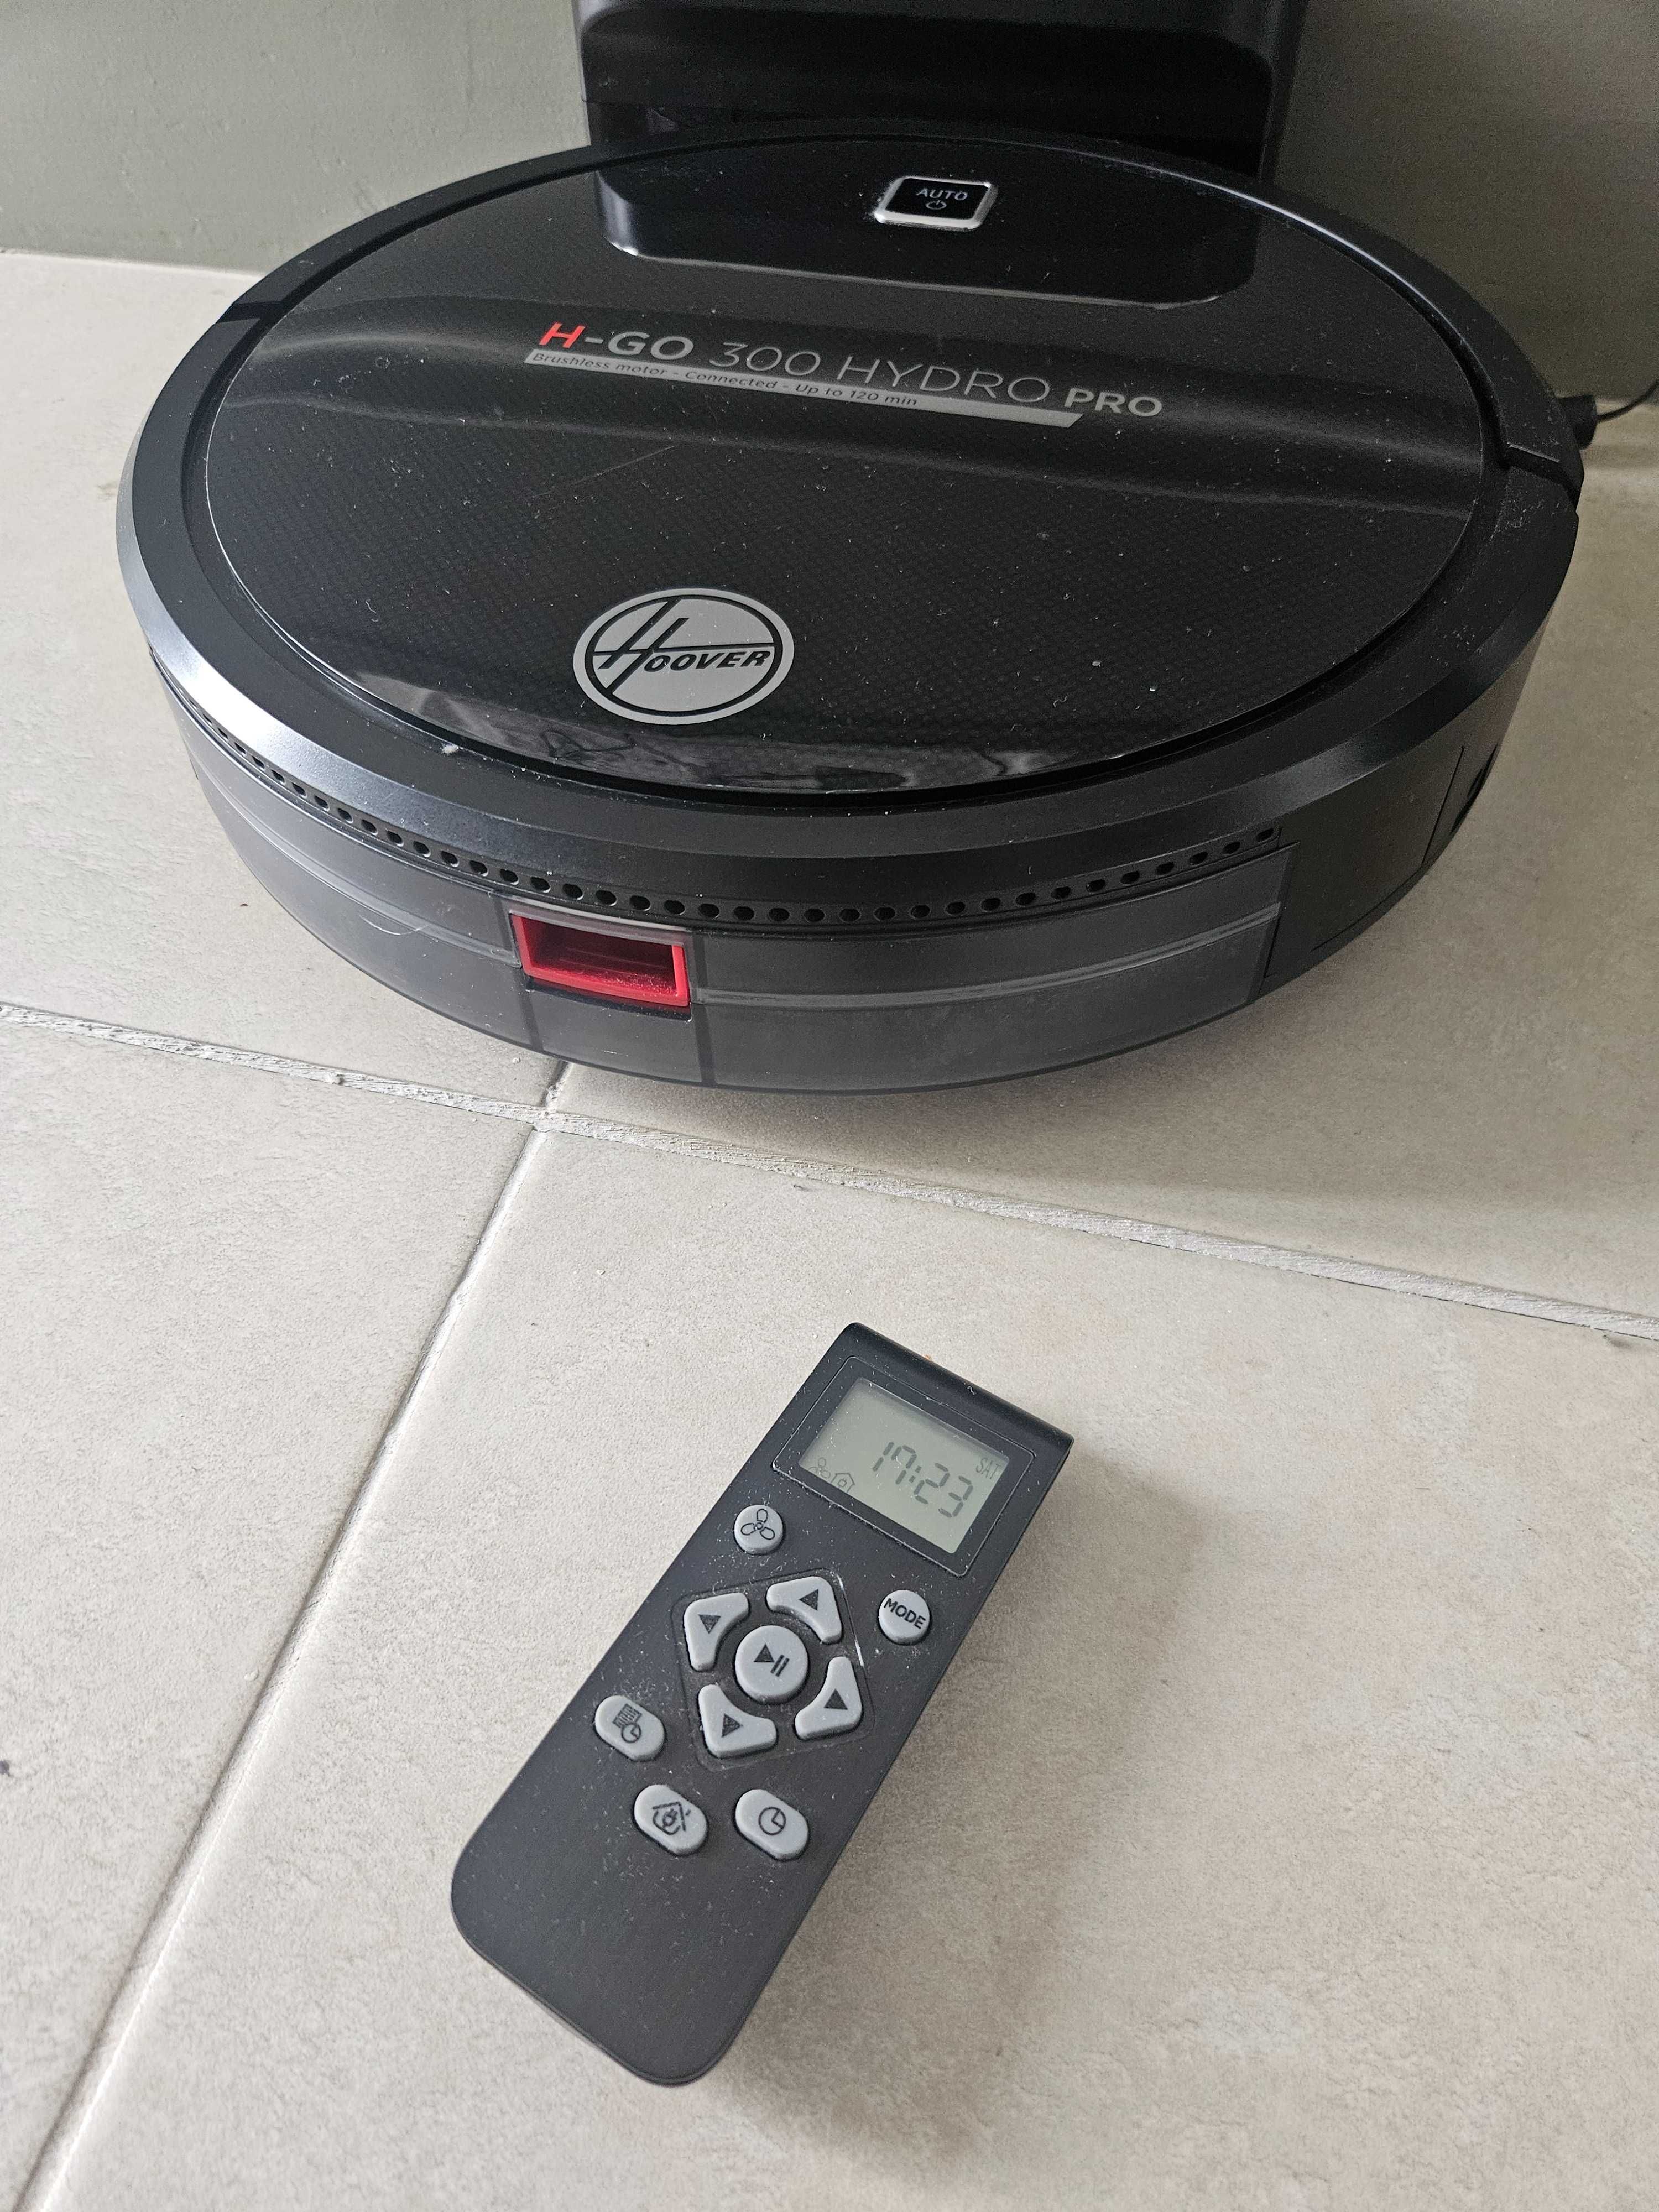 Robot Hoover H-Go 300 Hydro Pro